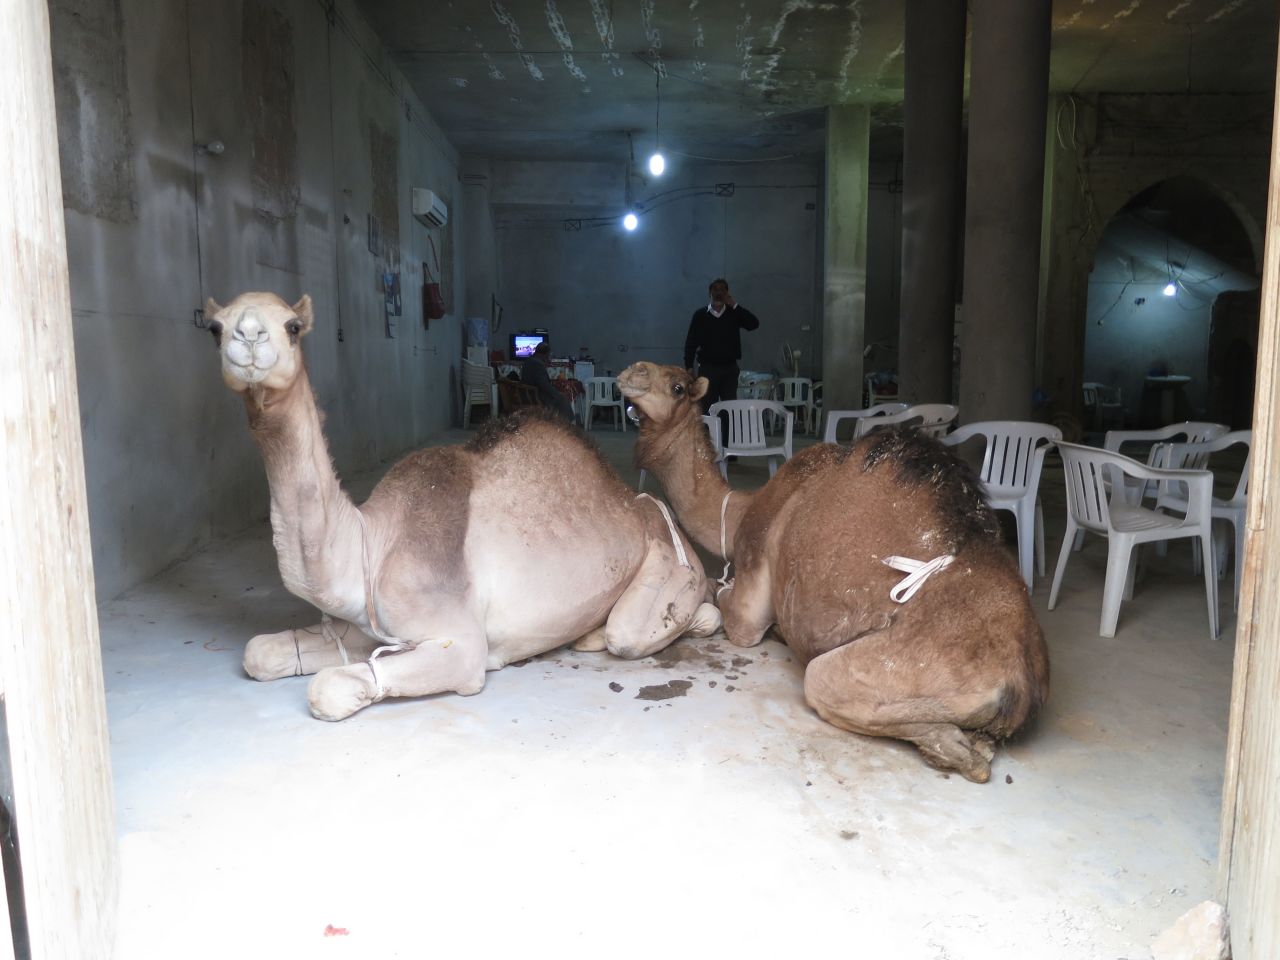 Camels hang out in Old Town, Tripoli.